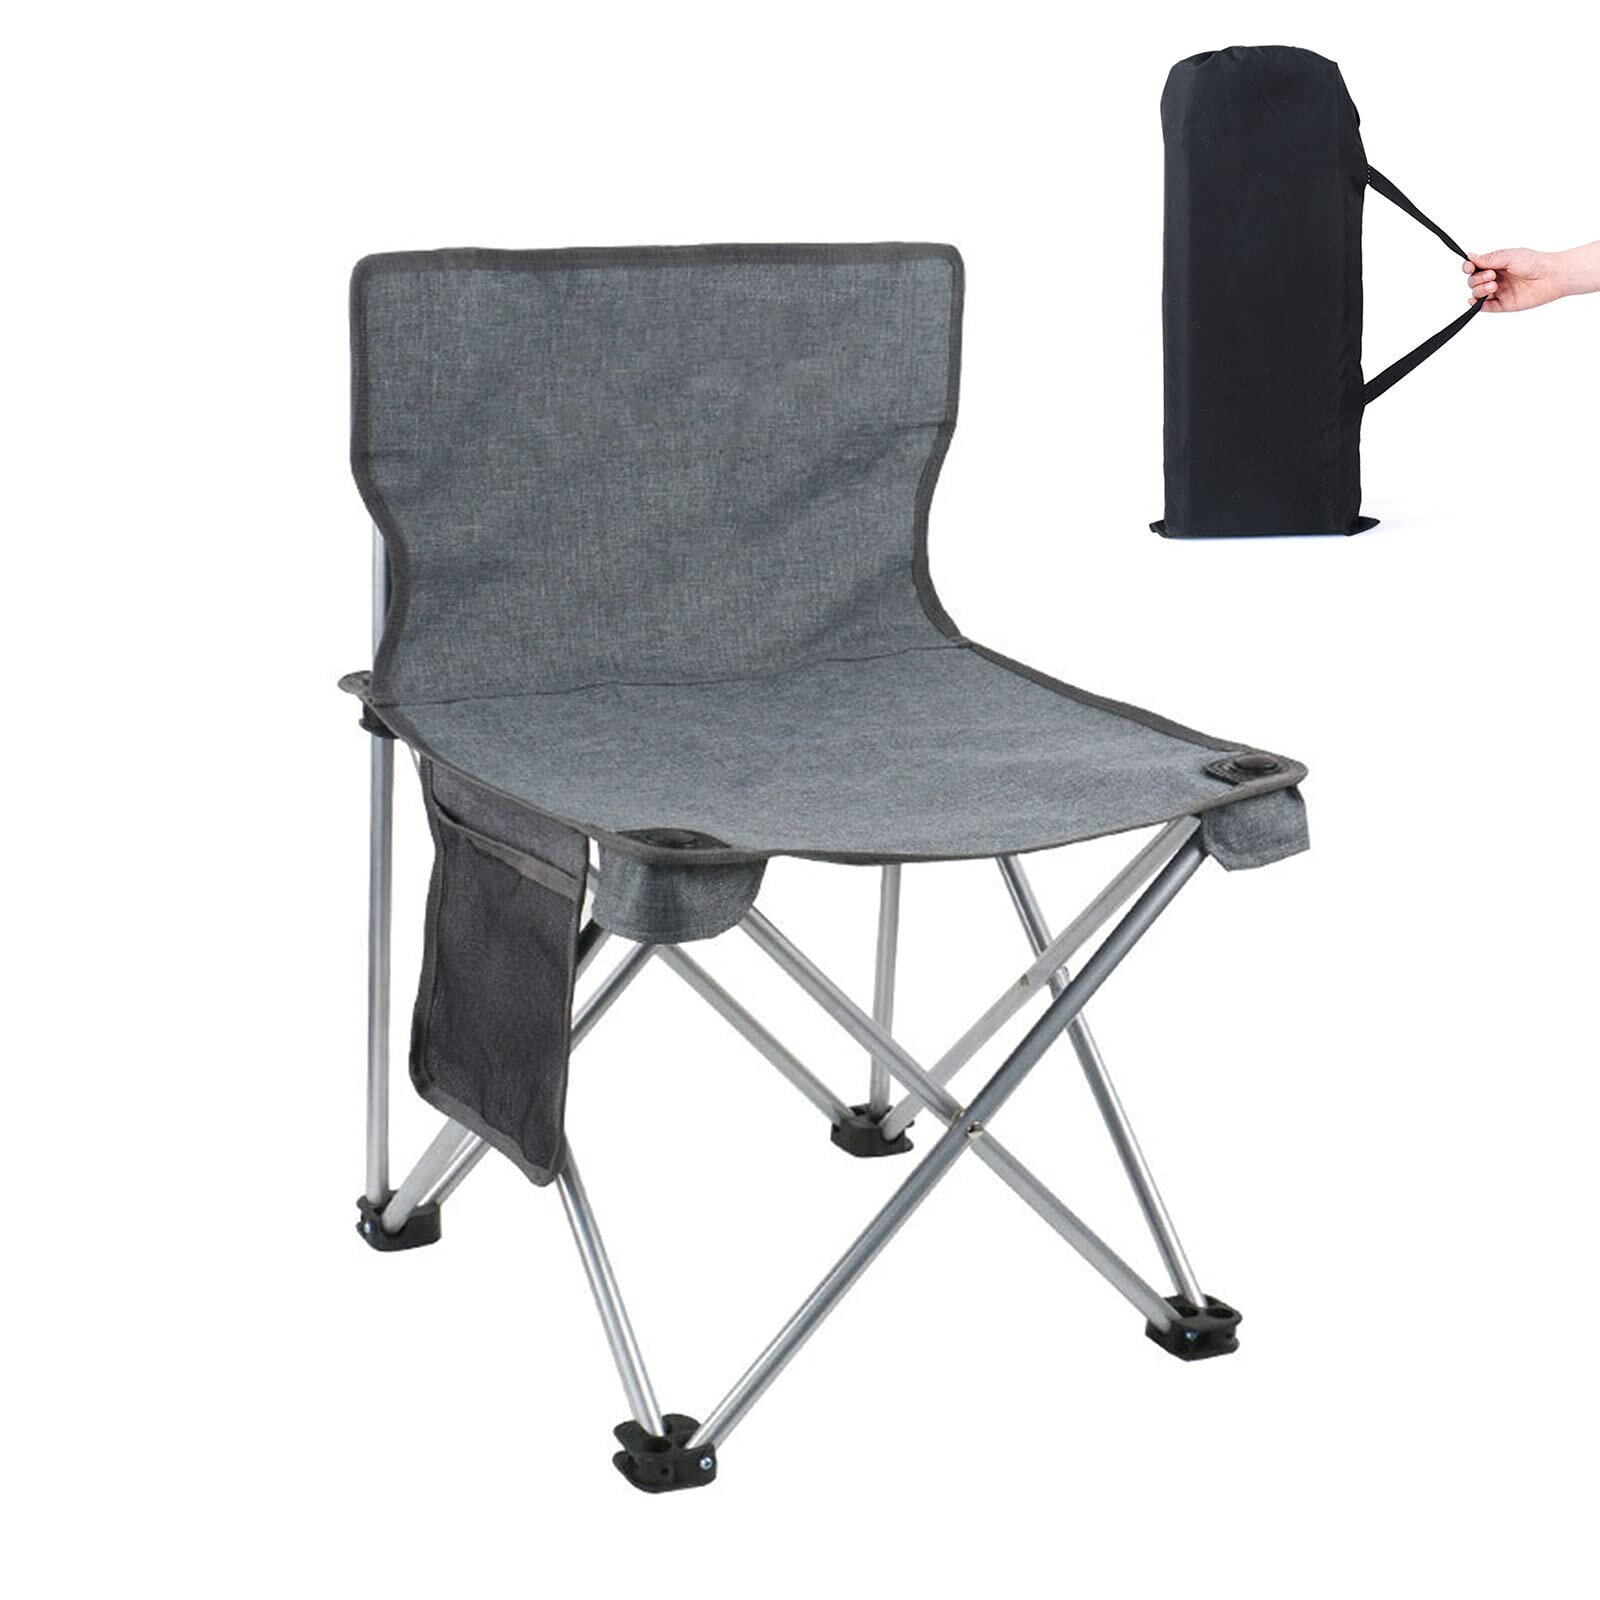 Fishing Camping Outdoor Portable Folding Chair Stool Seat 